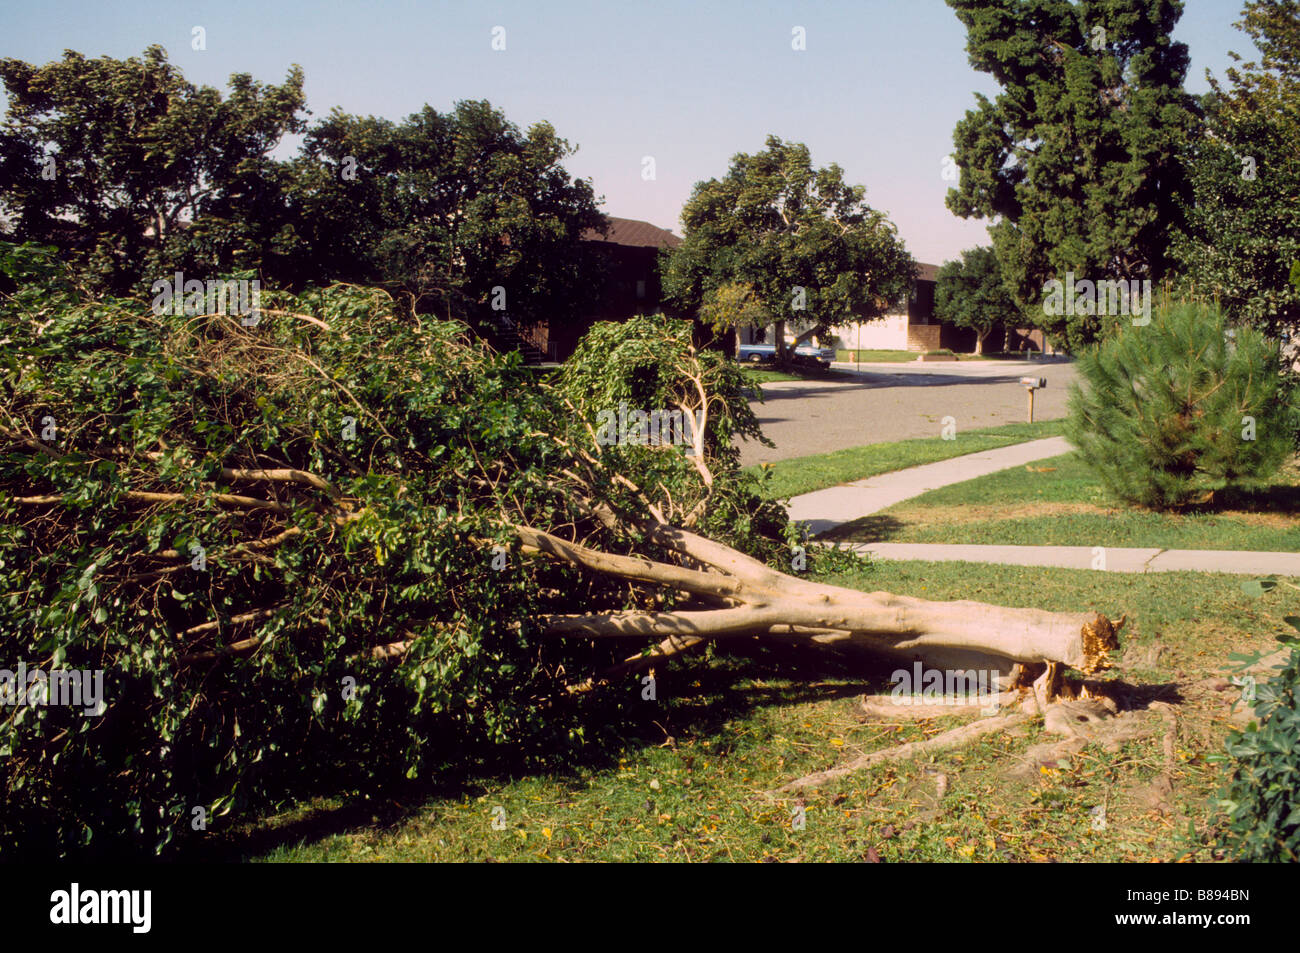 Tree, blown down by strong winds, lies in residential yard Stock Photo